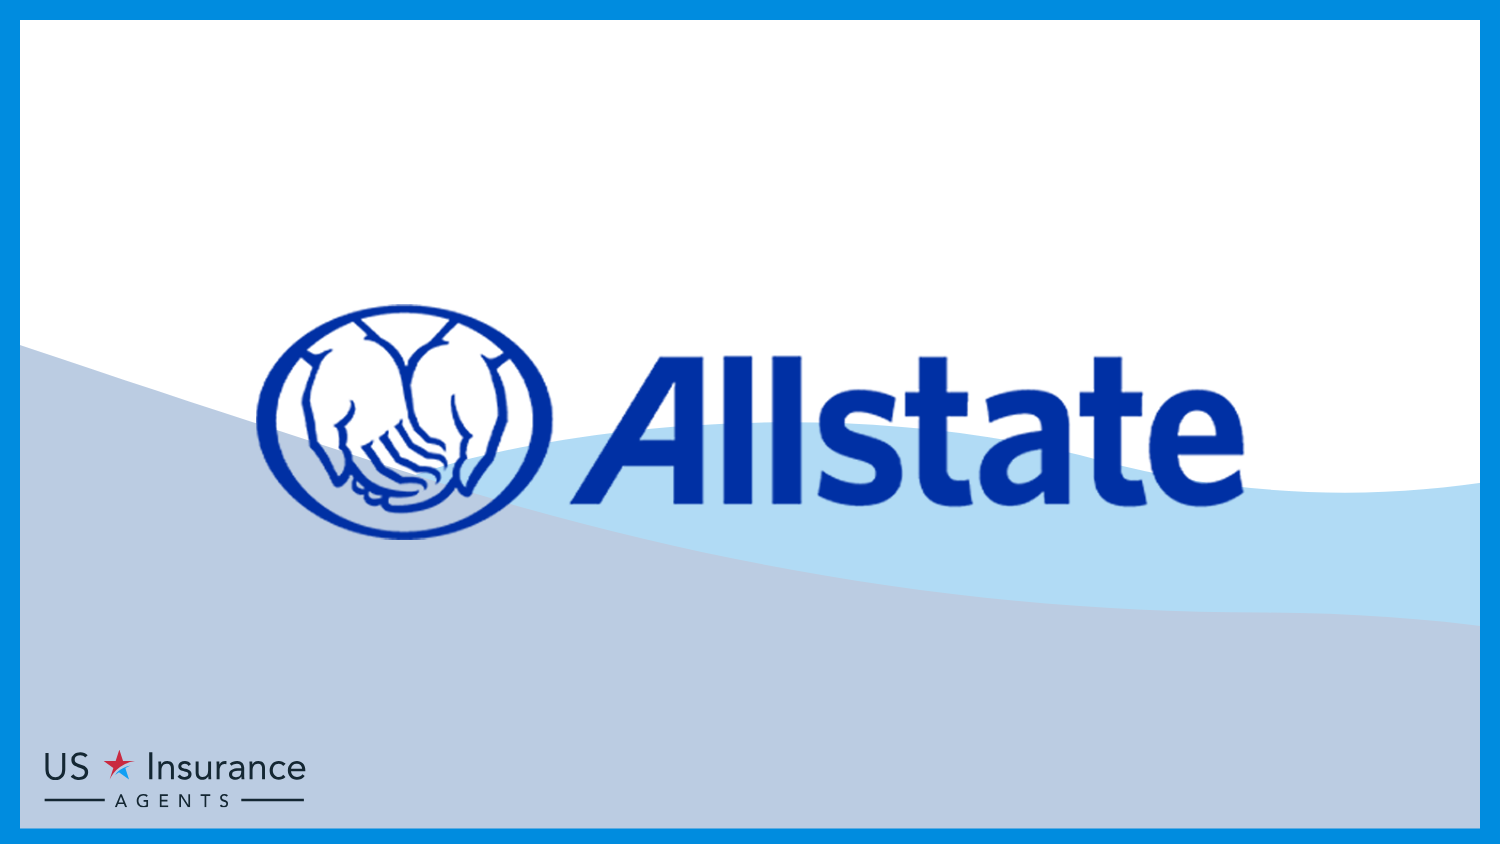 Allstate: Best Business Insurance for Civil Engineers